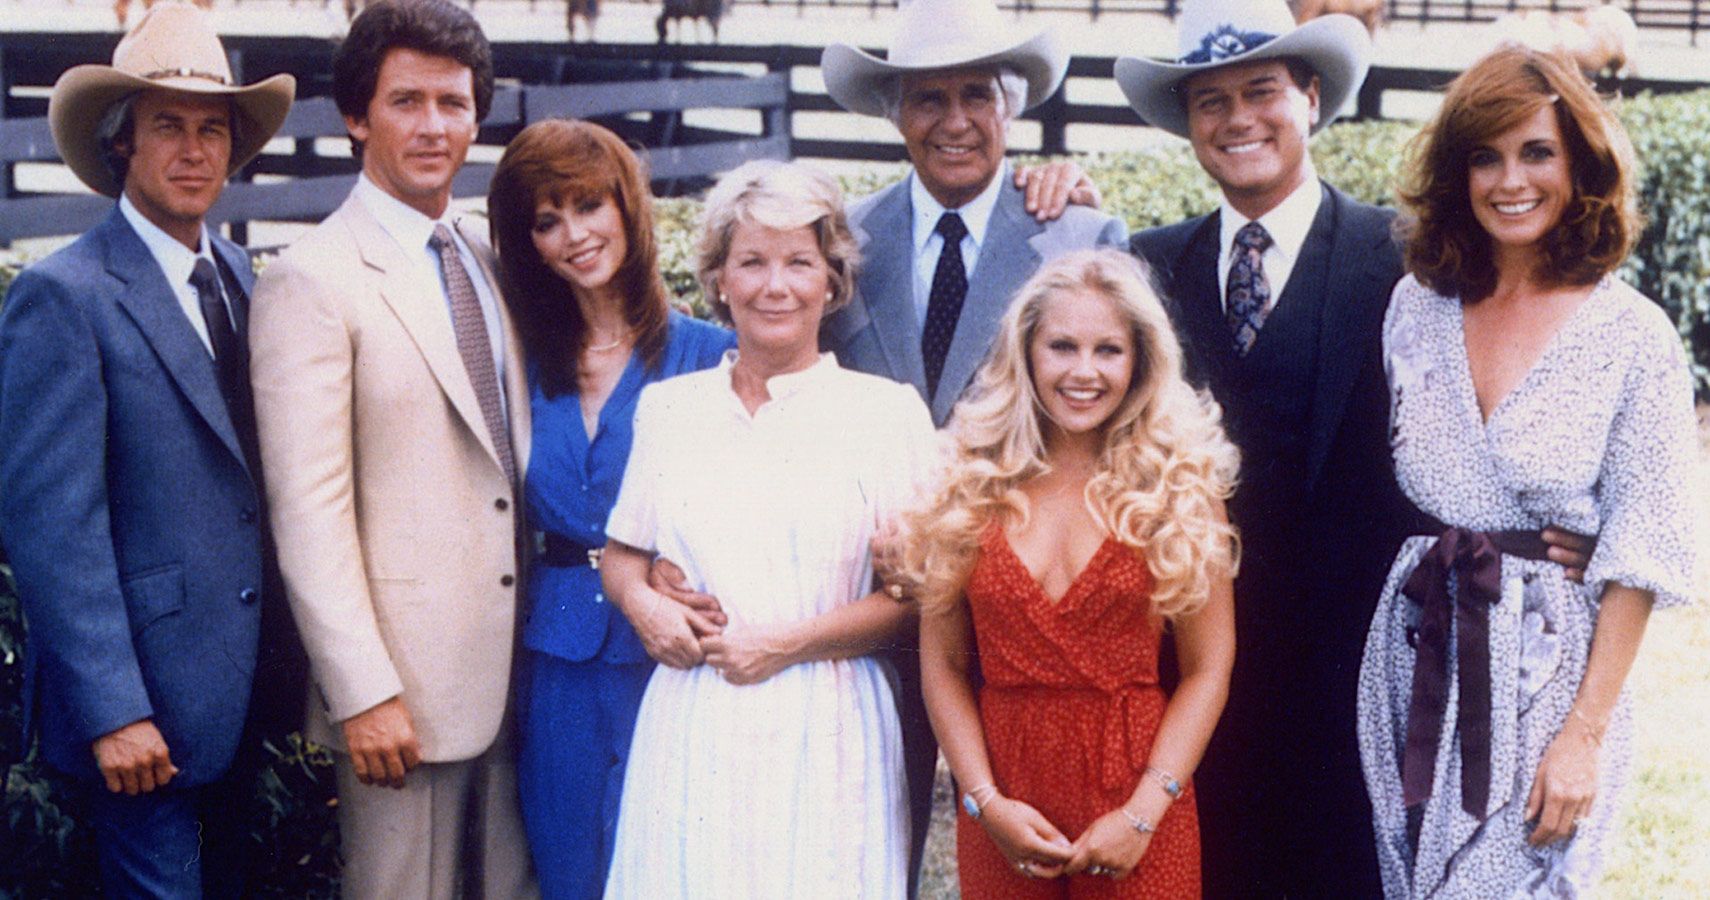 The 10 Best Episodes Of Dallas According To IMDb